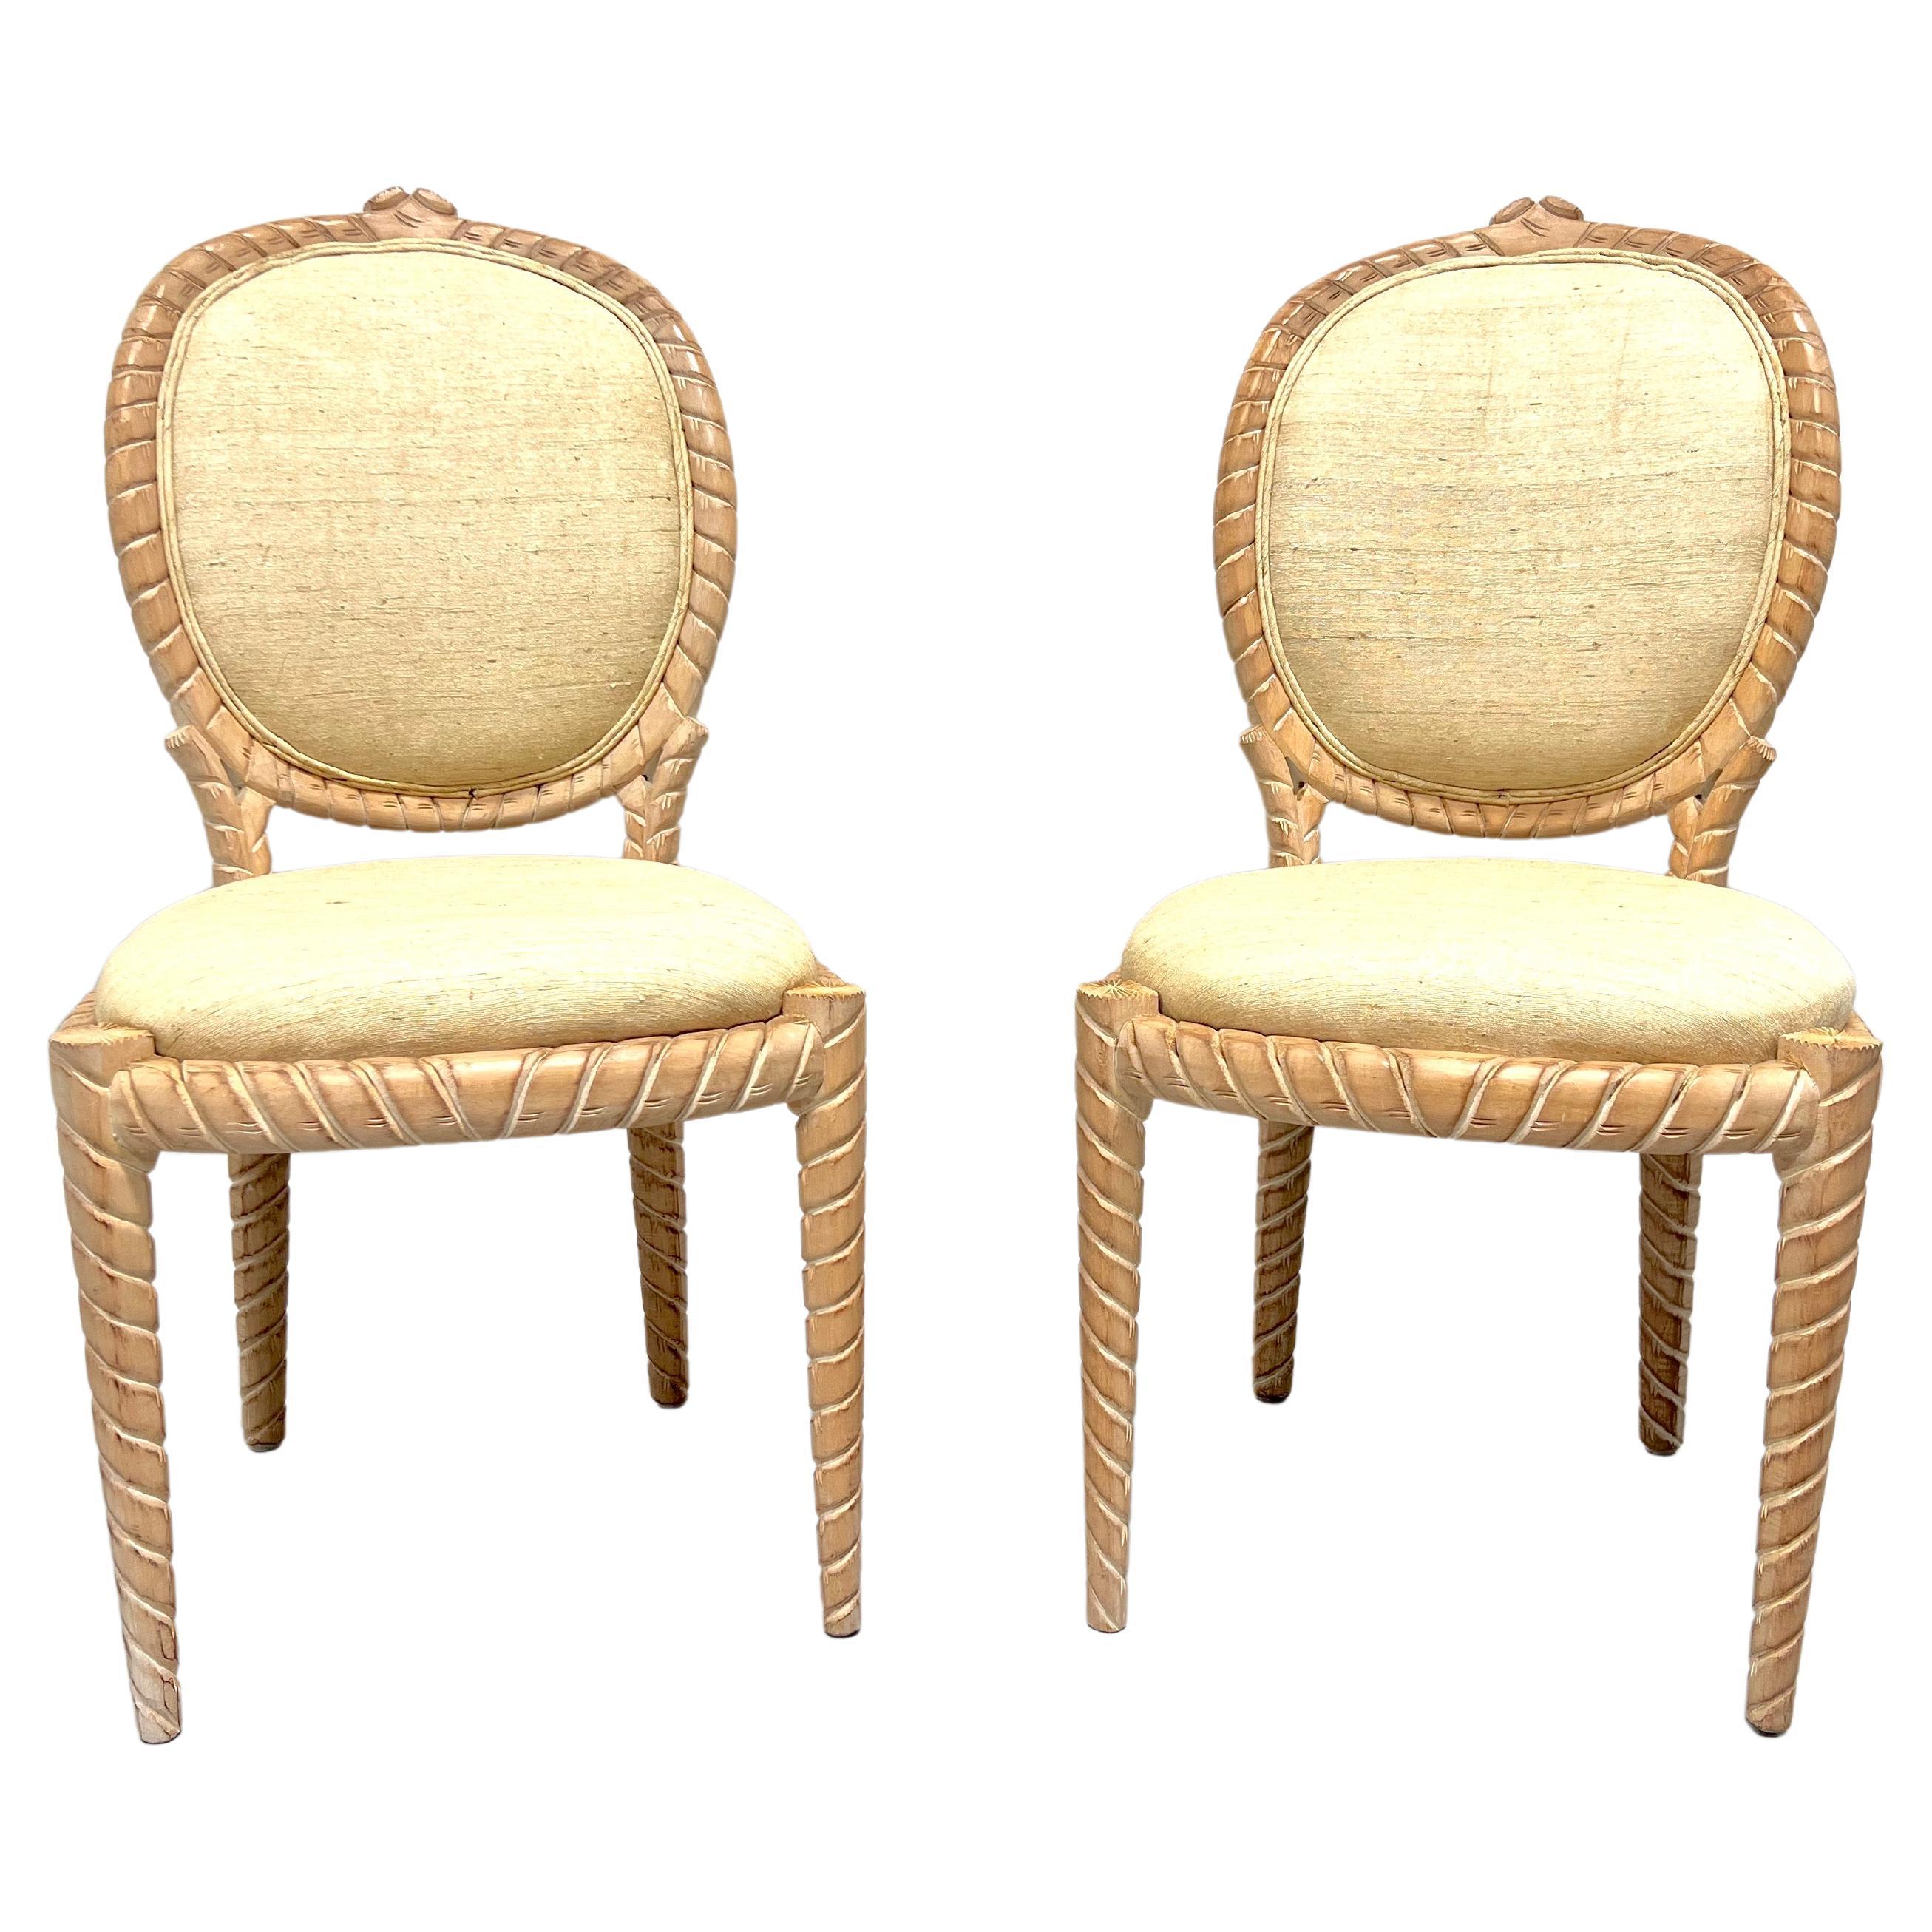 1980's Carved Whitewashed Wood Boho Rope Twist Dining Side Chairs - Pair B